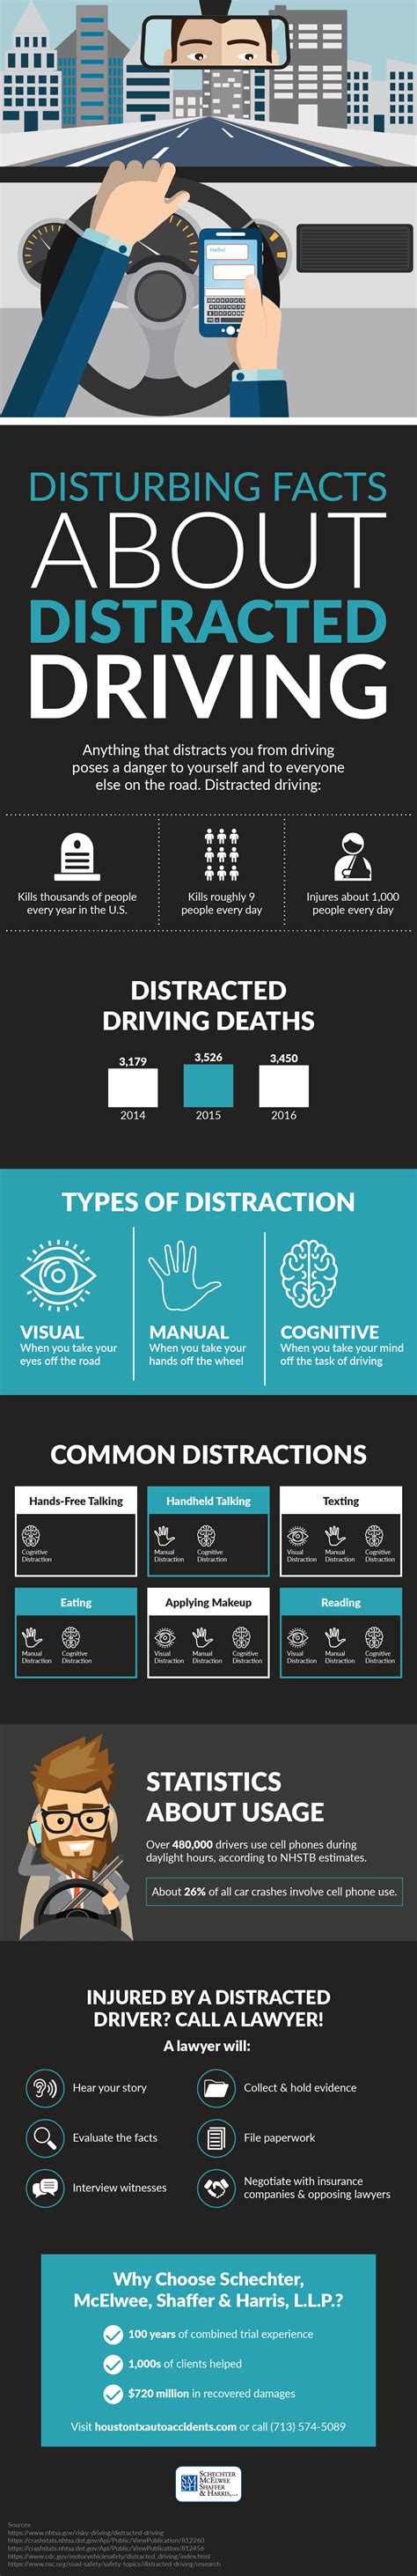 disturbing facts  distracted driving